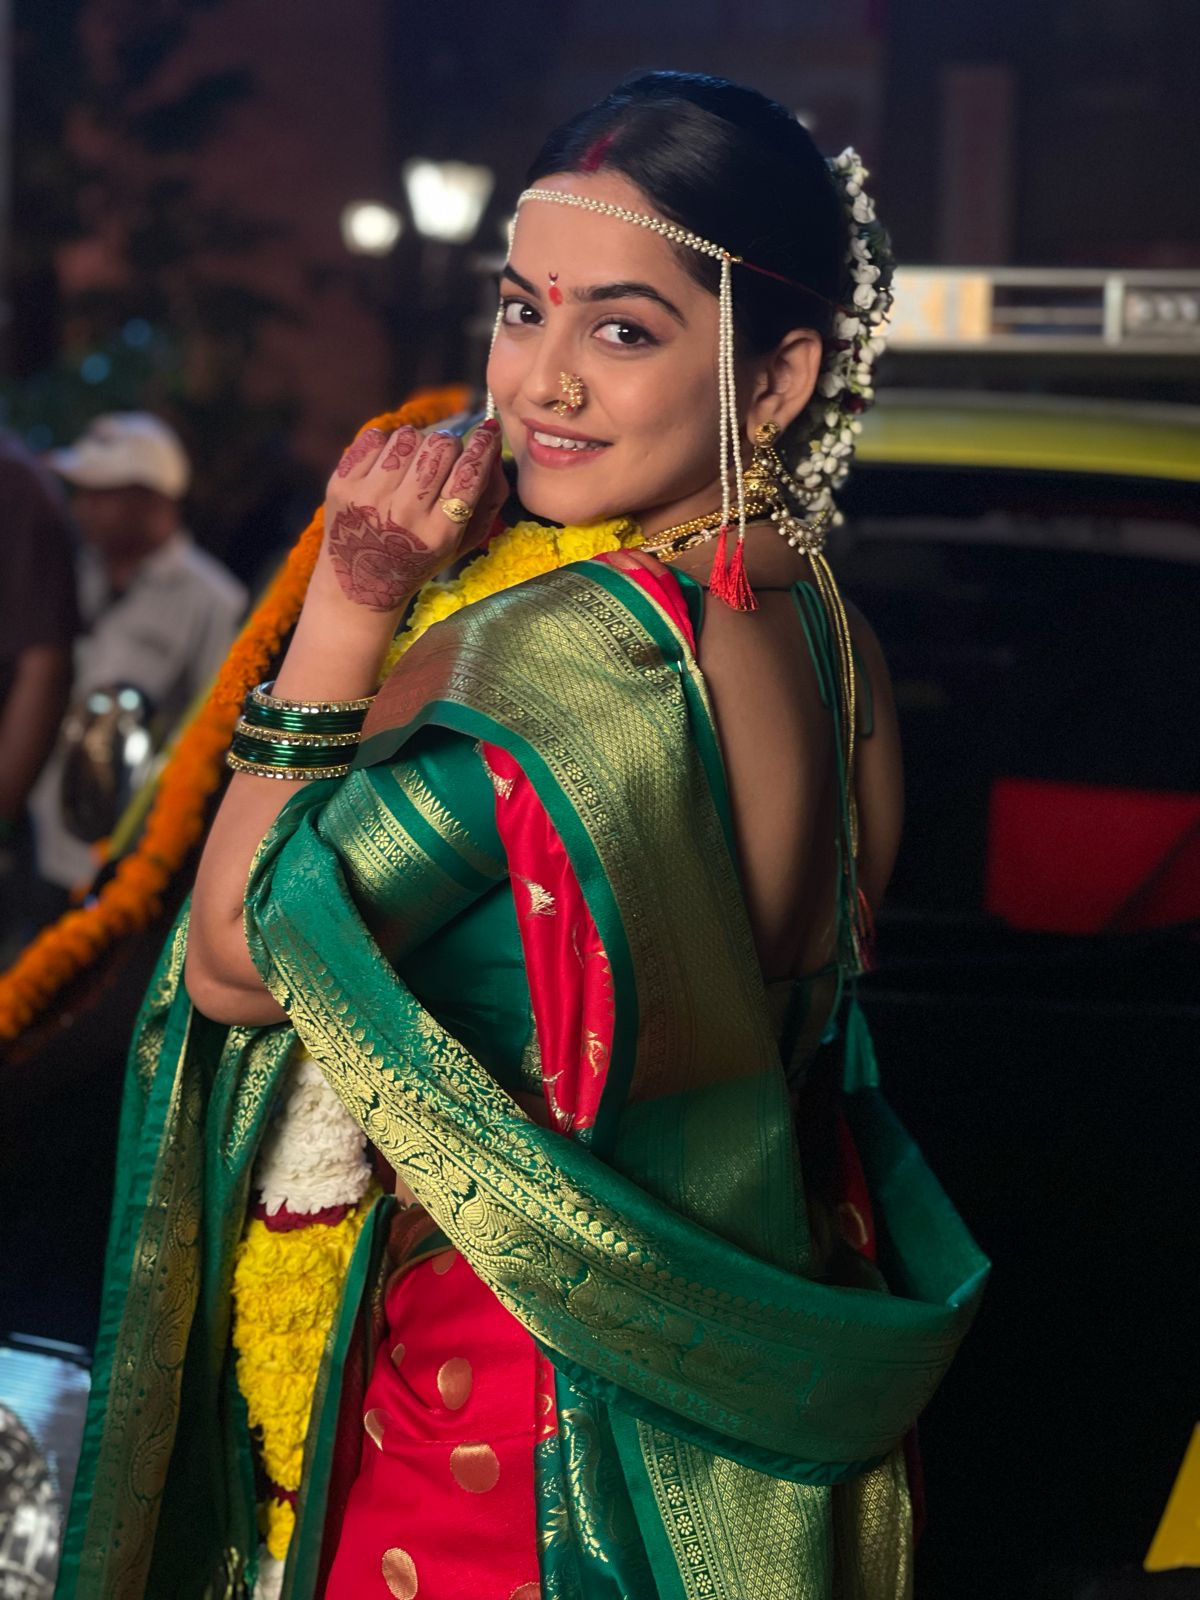 Neha Harsora plays a vivacious Maharashtrian florist girl named Sayli in the program; steals the show in the promo of the show 